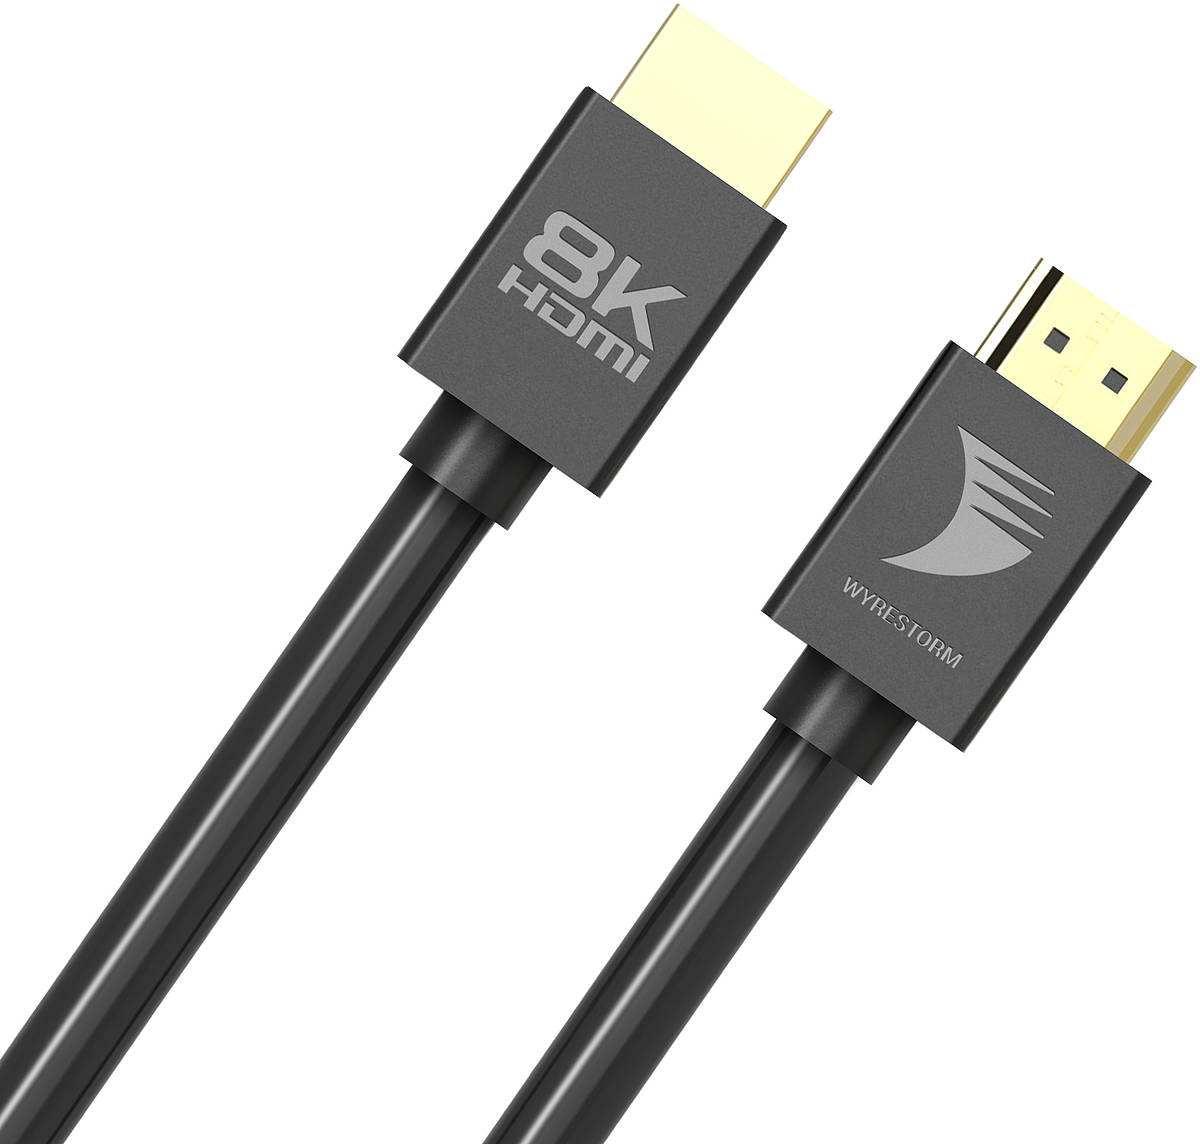 EXP-HDMI-3M-8K 3.00m WyreStorm 8K 60 HDMI 2.1 cable product image. Click to enlarge.